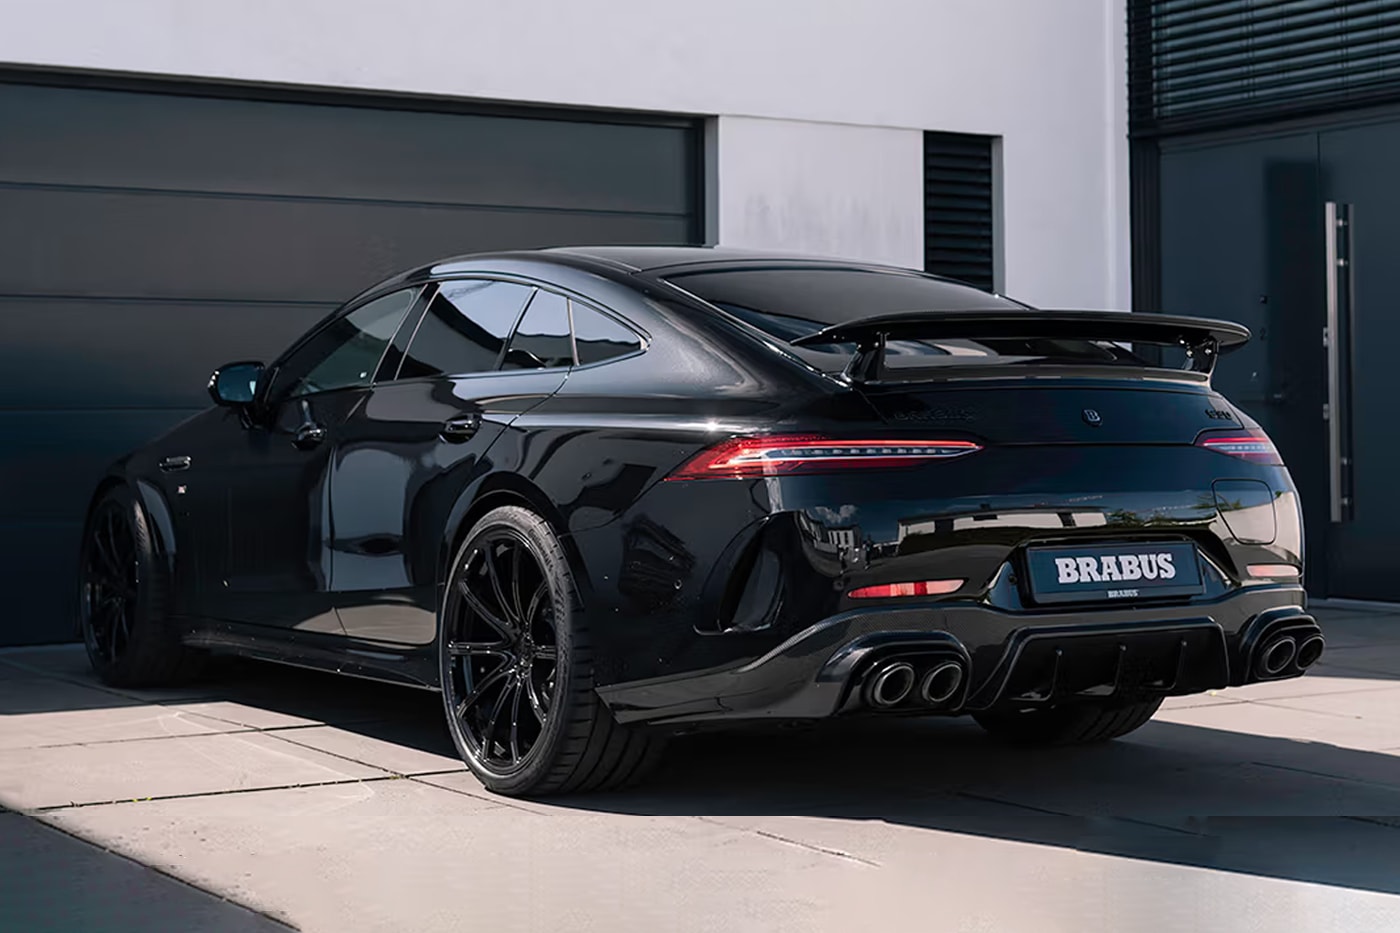 BRABUS 930 - Based on Mercedes-AMG GT 63 S E-Performance - News & Events -  Brand - BRABUS